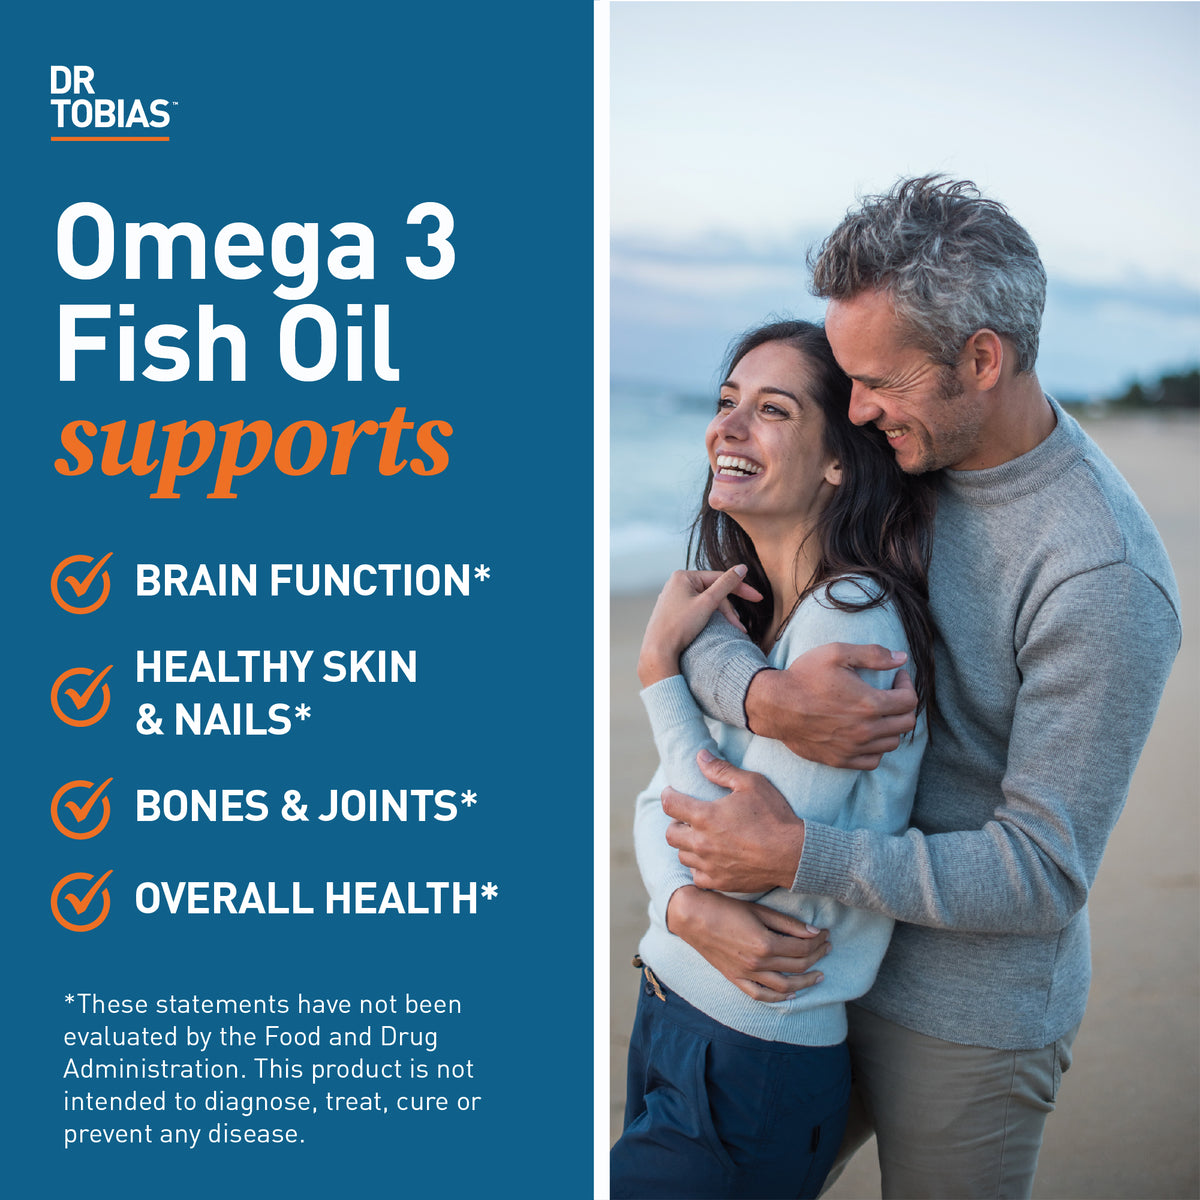 Omega 3 fish oil supports brain function, healthy skin and nails, bones and joints, and overall health. 